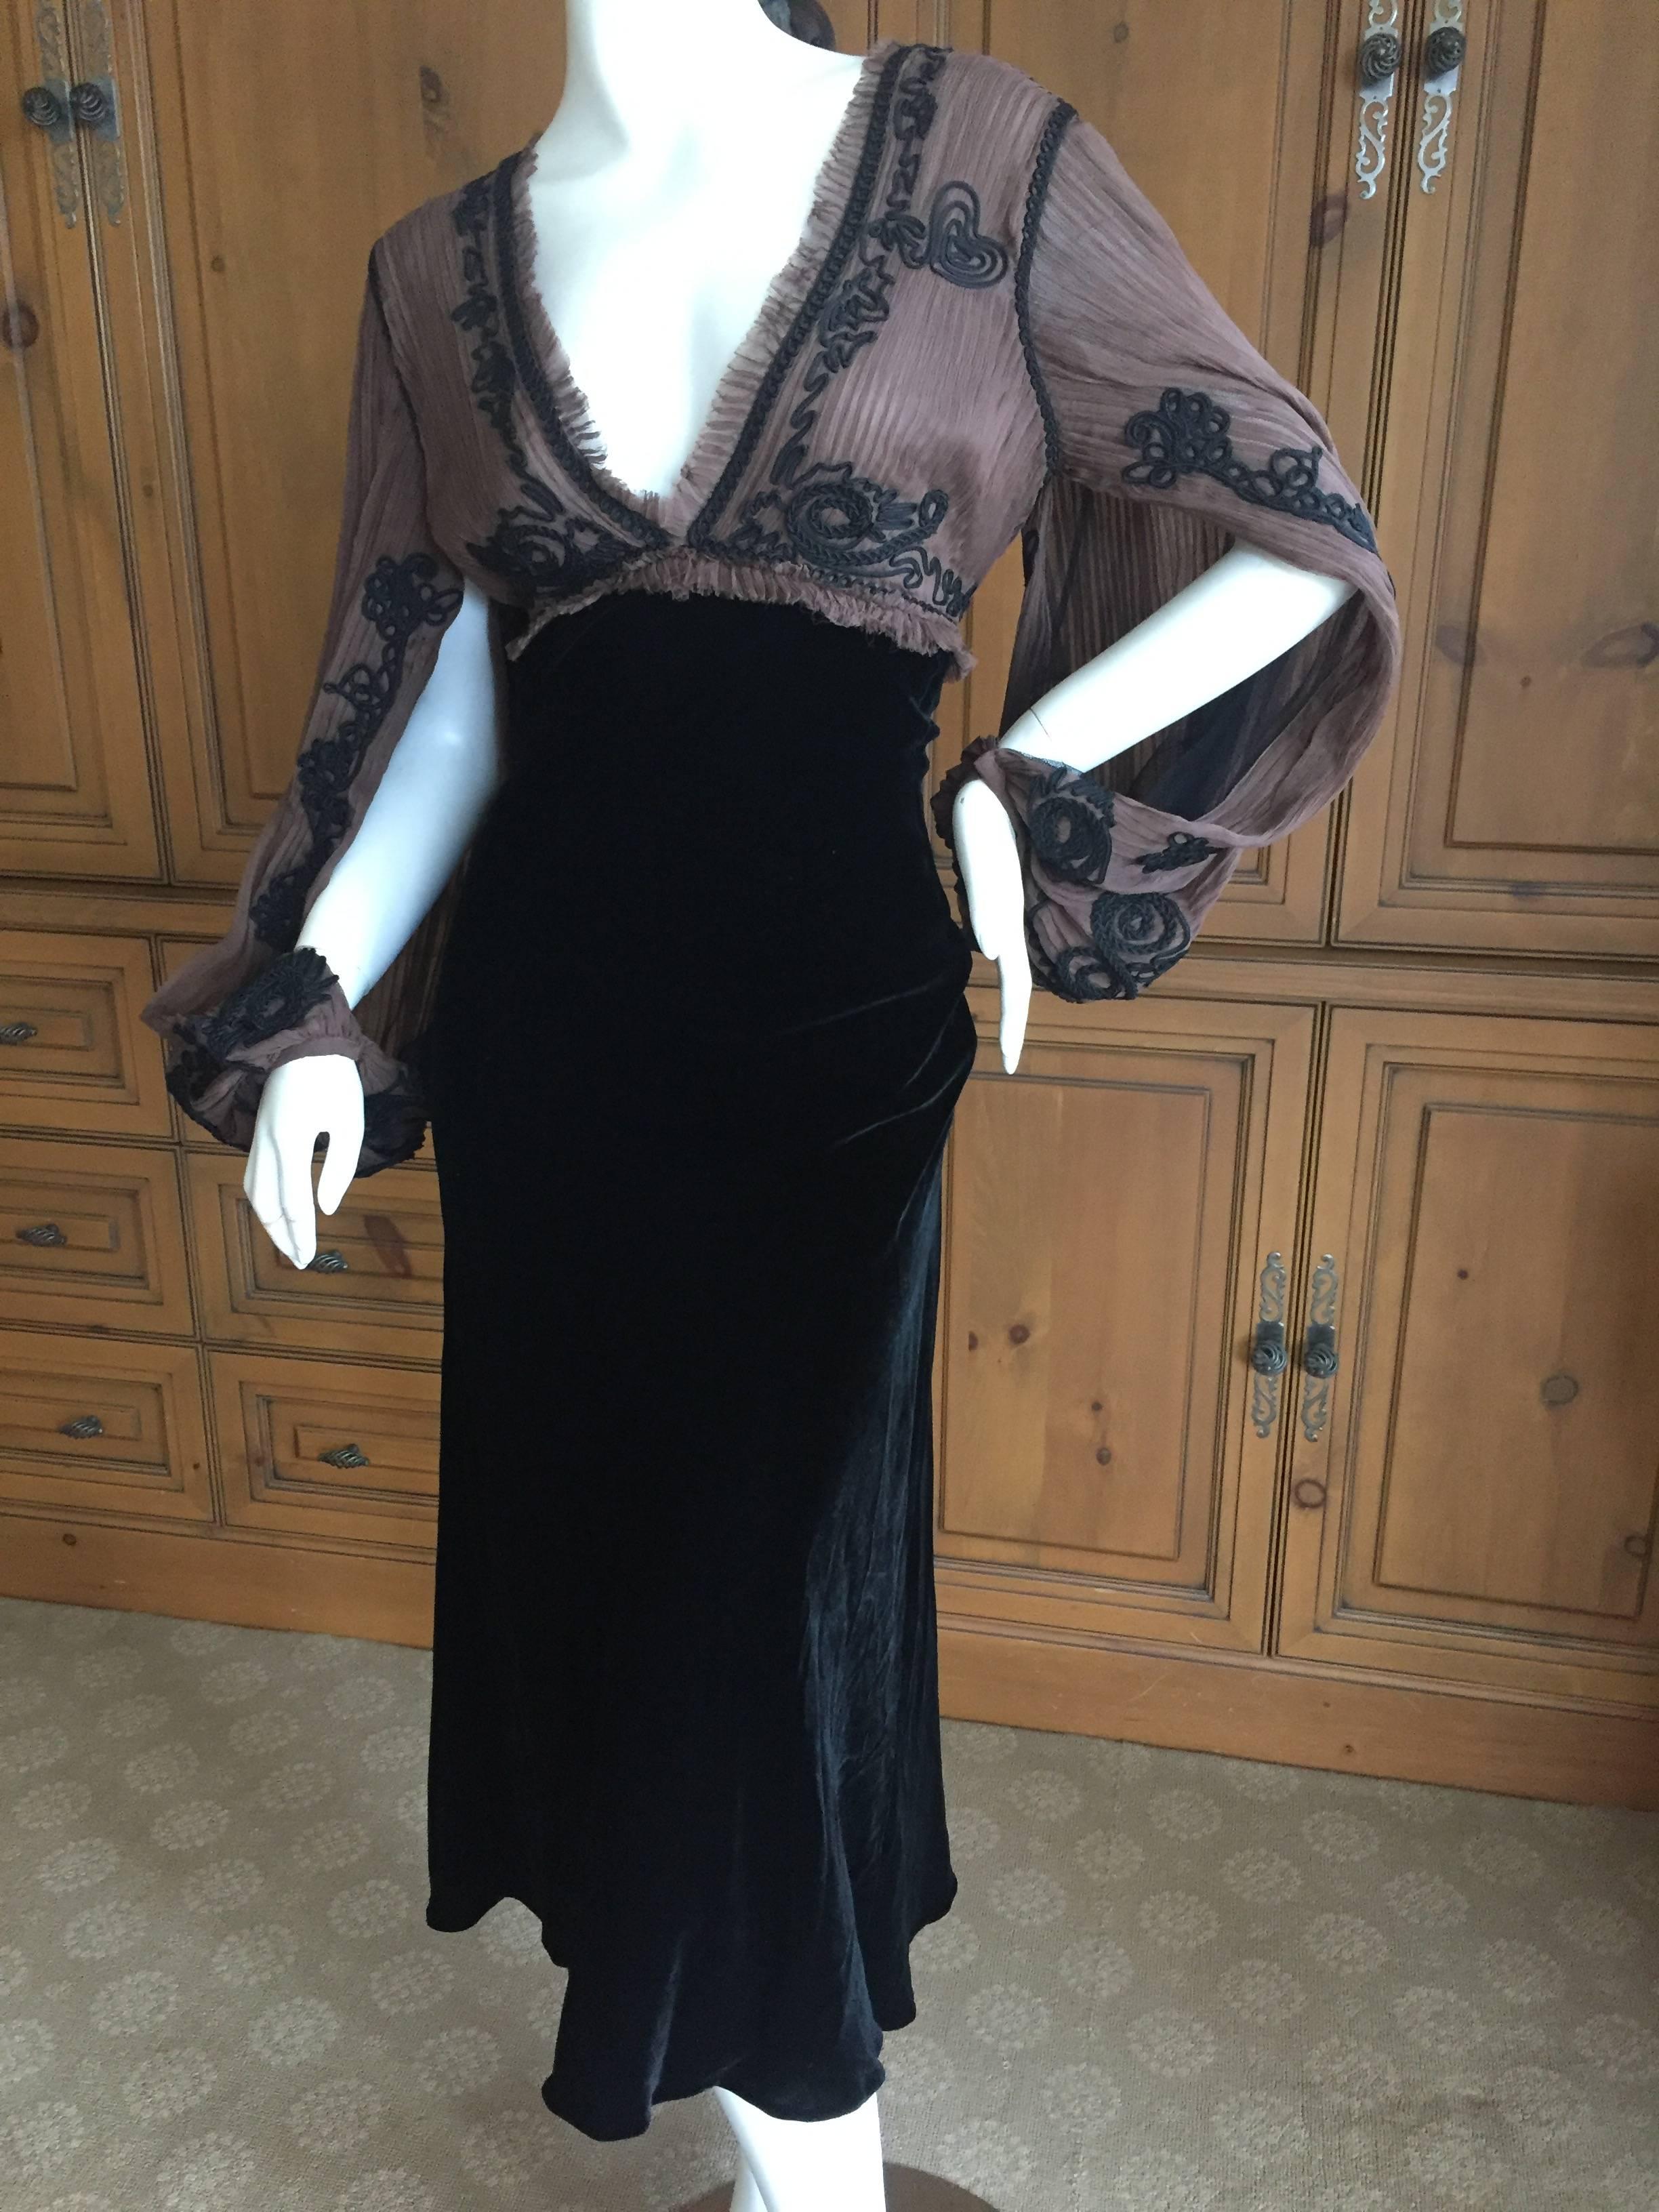 Wonderful vintage dress from Jean Paul Gaultier.
Featuring a velvet skirt with sheer top, trimmed in black soutache with convertible kimono sleeves which snap at the cuff and can be worn numerous ways.
Size 44
Bust 42